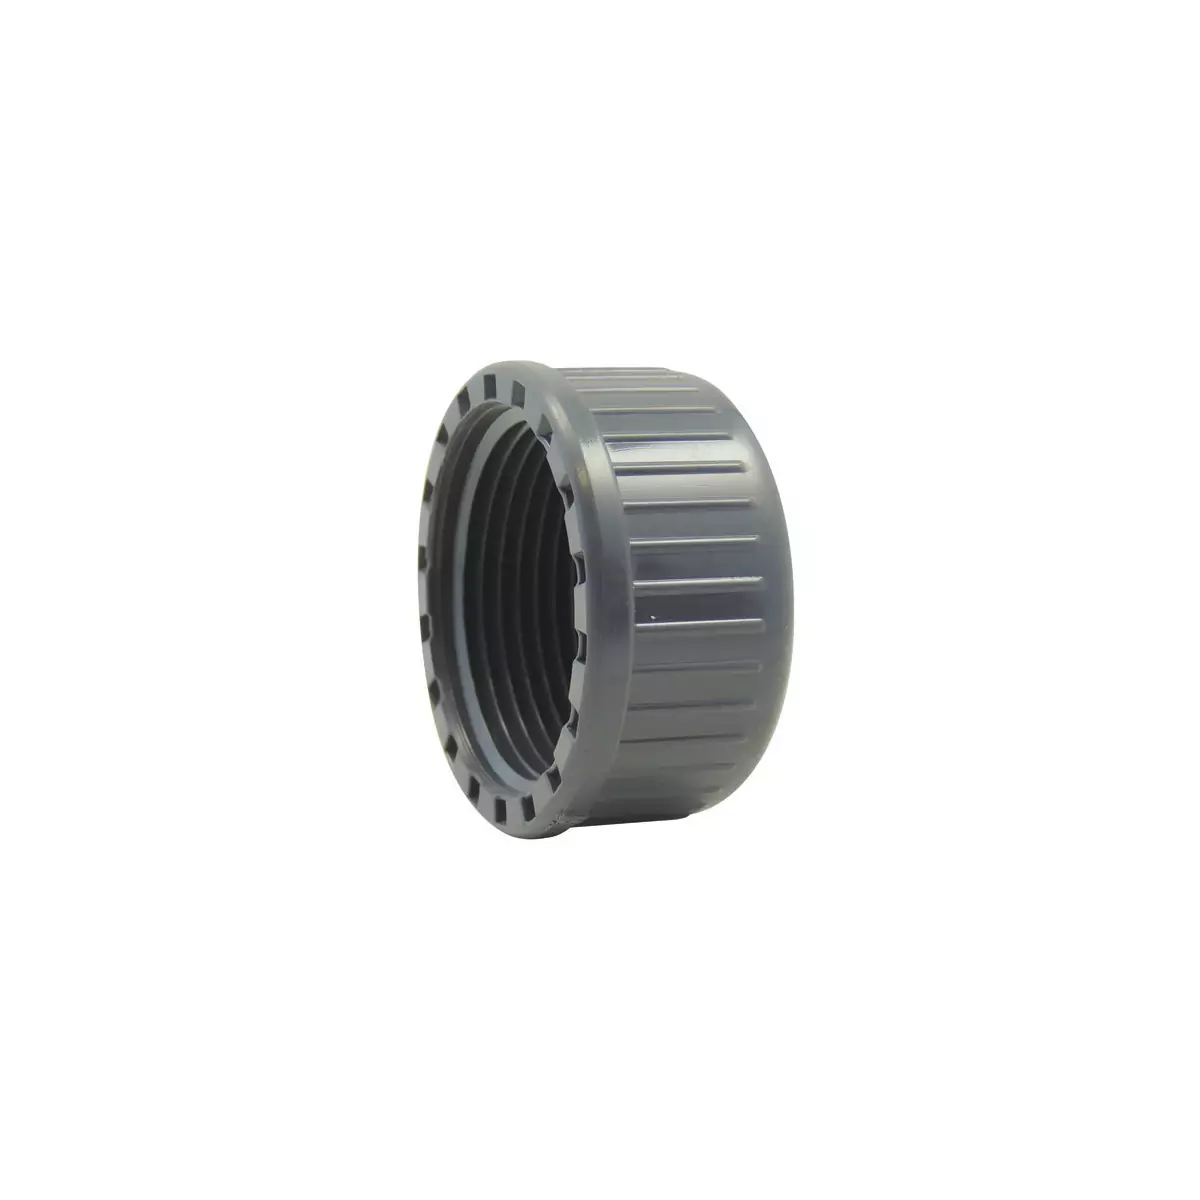 Female cap with EPDM O-ring